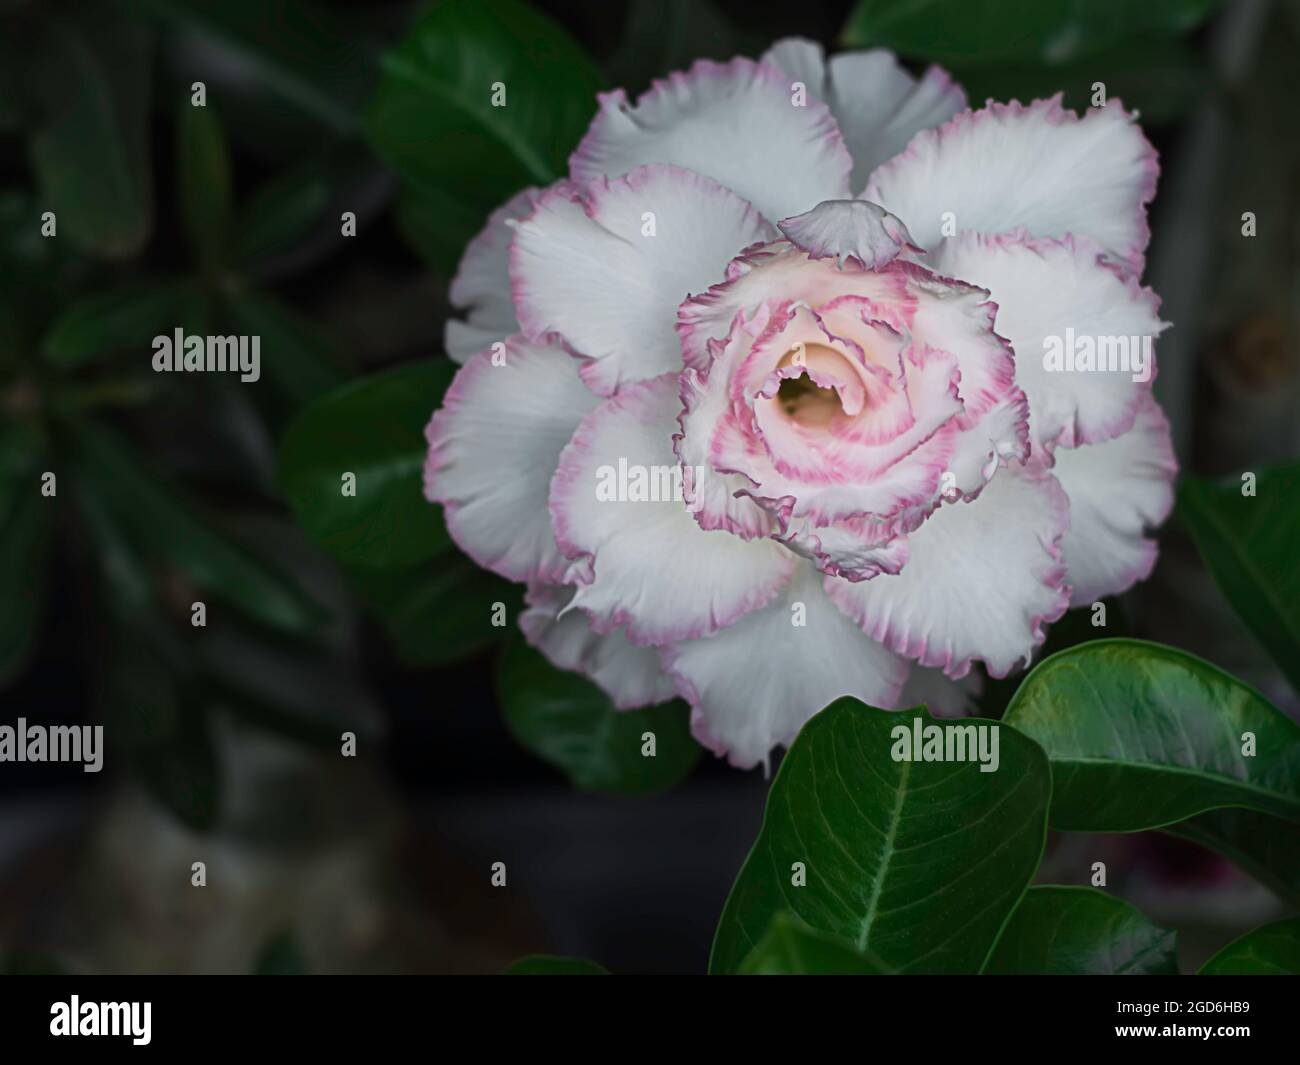 White desert rose, other names adenium obesum. Blooming white adenium, obesum, desert rose, flowers surrounded by green leaf with blurred background. Stock Photo